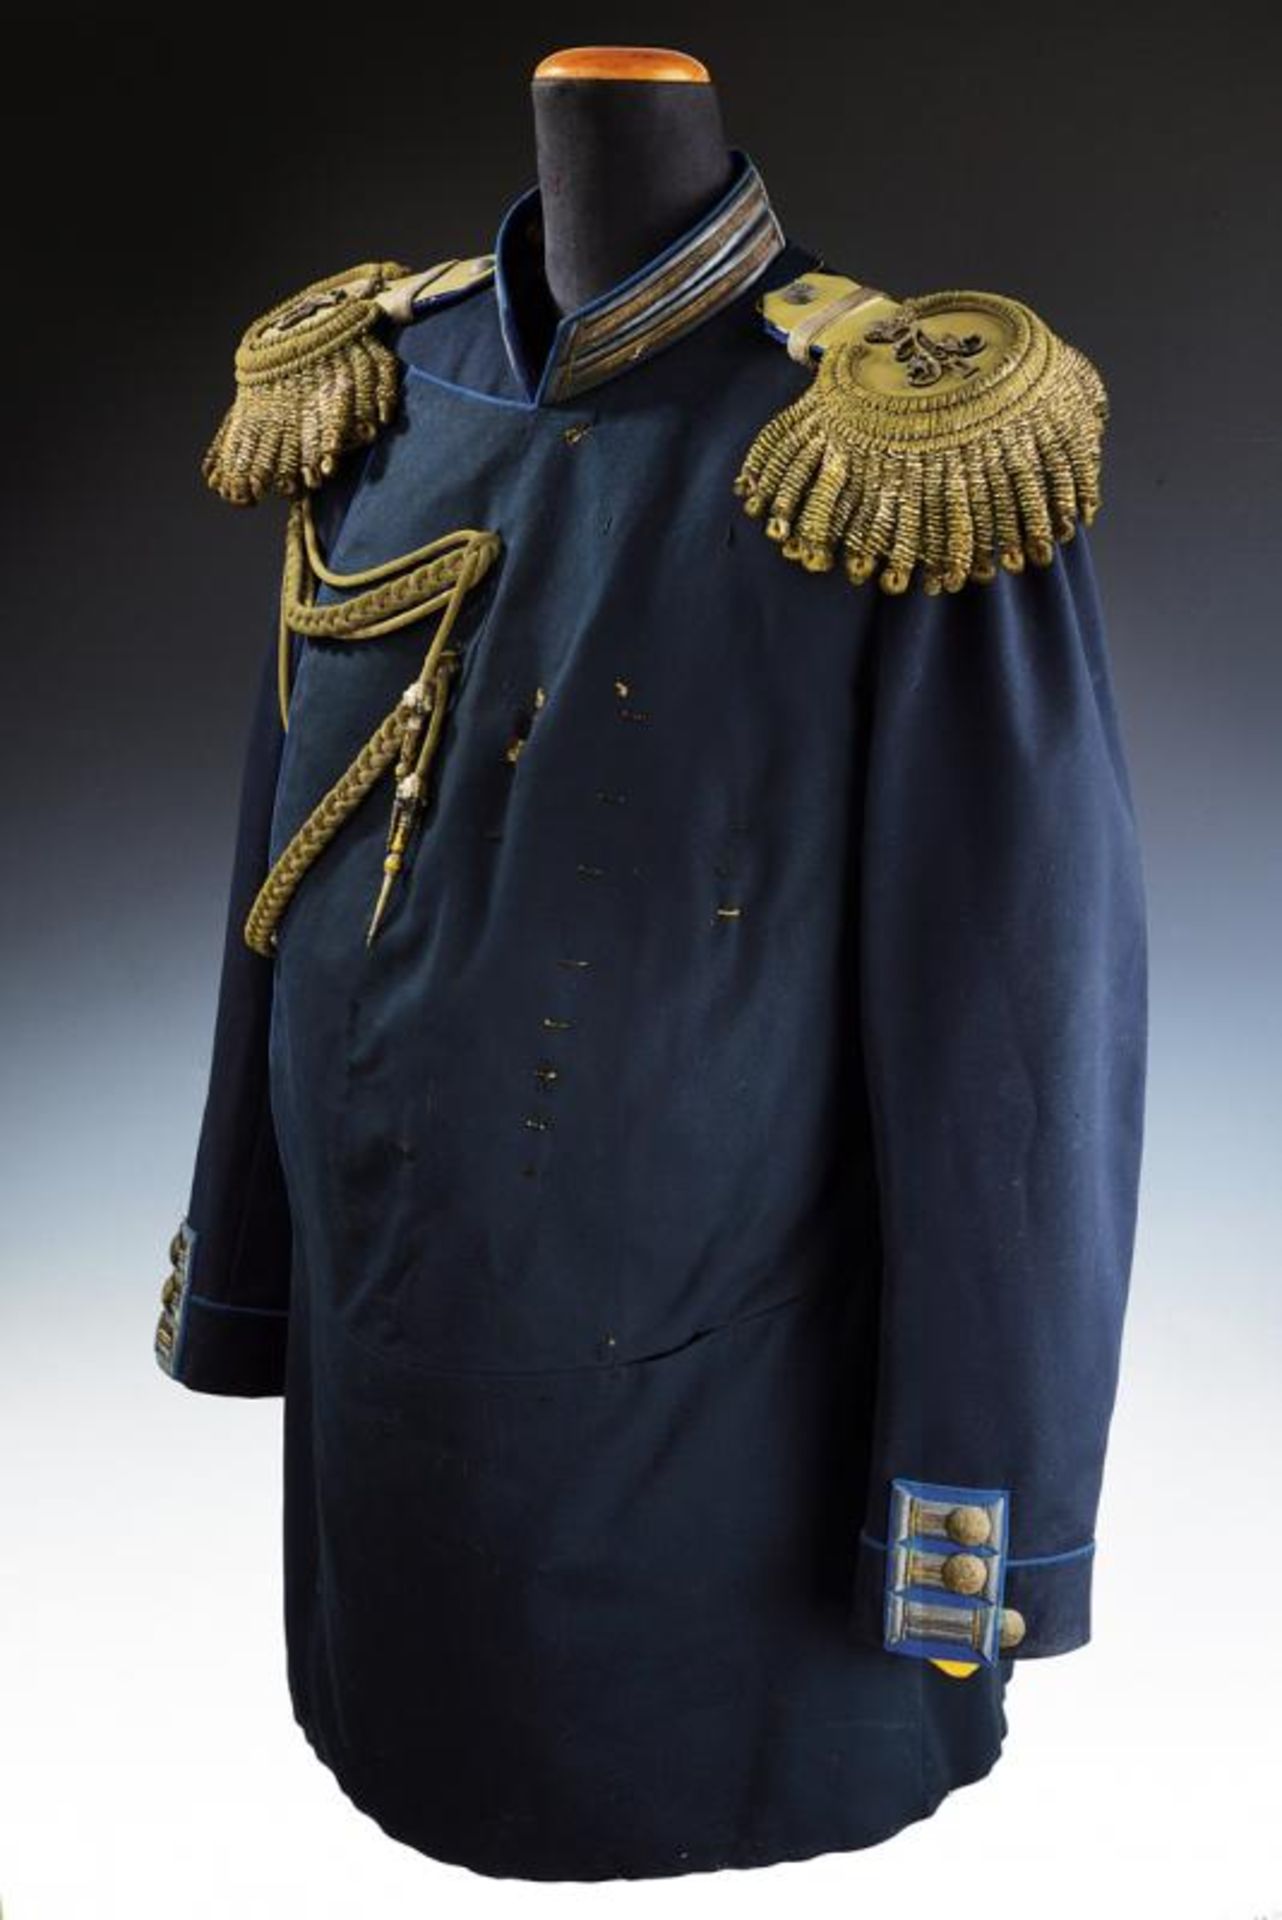 A General officer's uniform of the 3rd Finnish Battalion of jagers belonged to Tsar Alexander III - Image 16 of 21